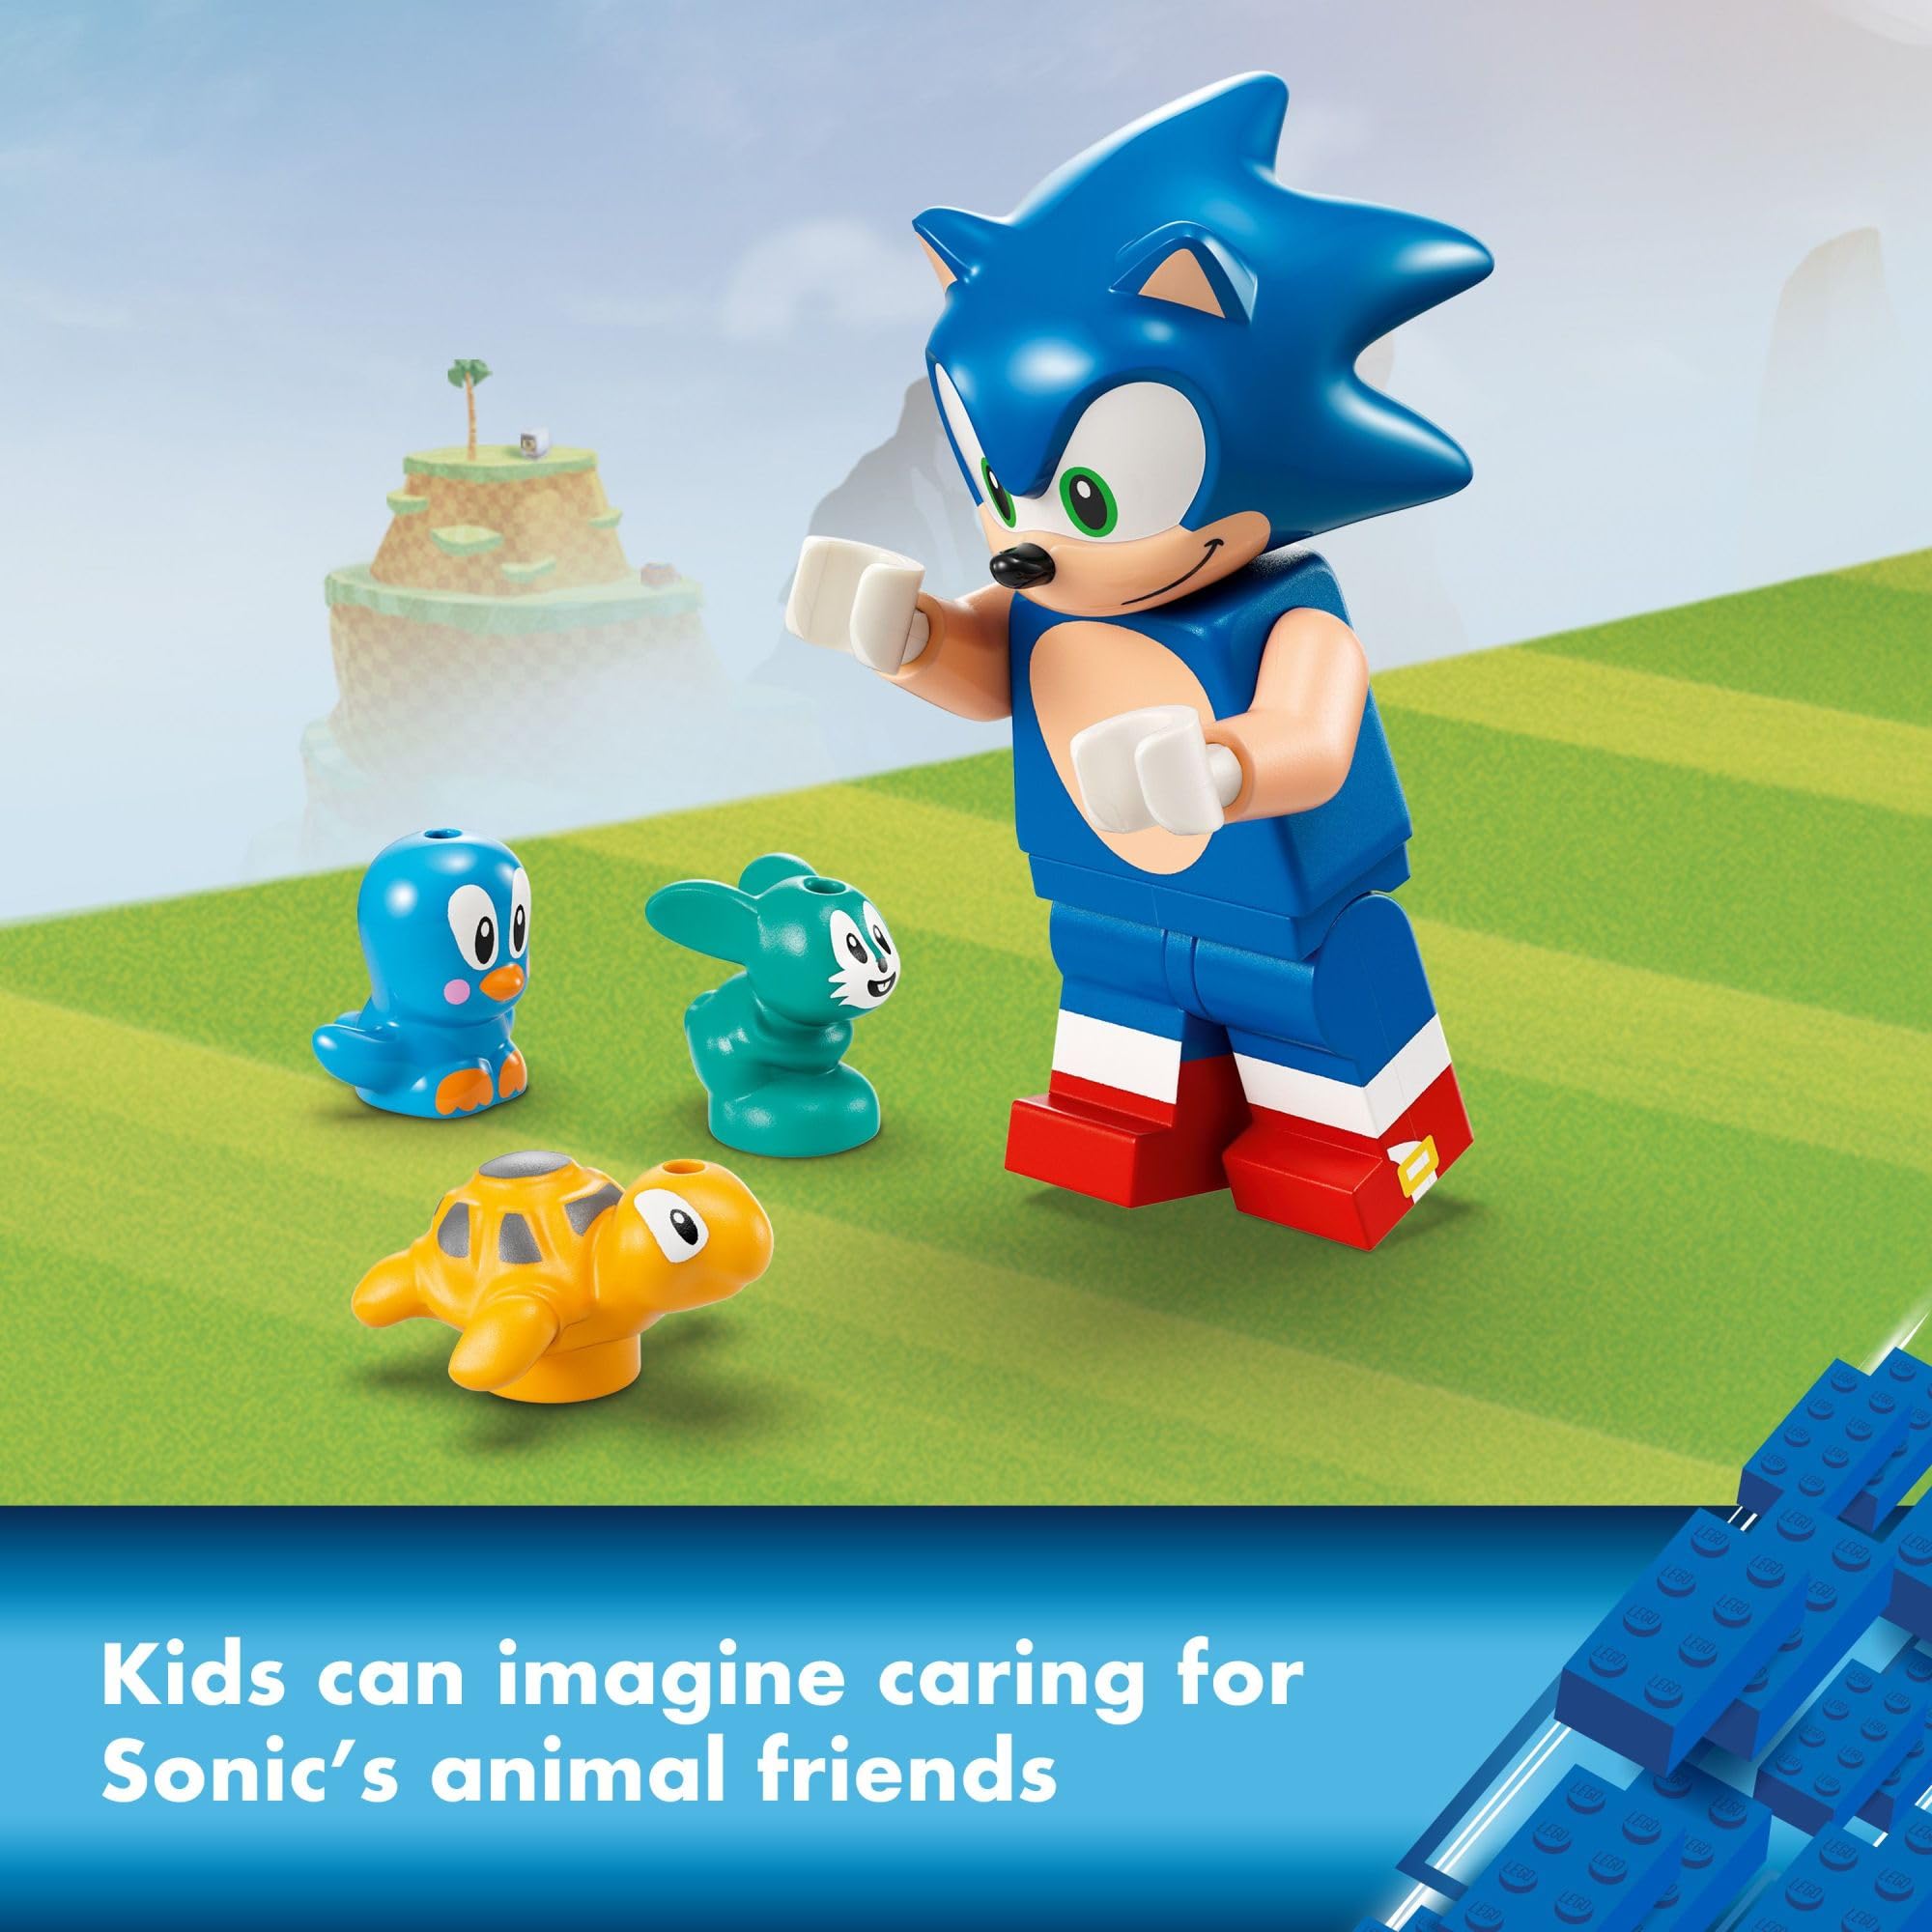 LEGO Sonic The Hedgehog Sonic vs. Dr. Eggman’s Death Egg Robot 76993 Building Toy for Sonic Fans and 8 Year Old Gamers, Includes Speed Sphere and Launcher Plus 6 Sonic Figures for Creative Role Play